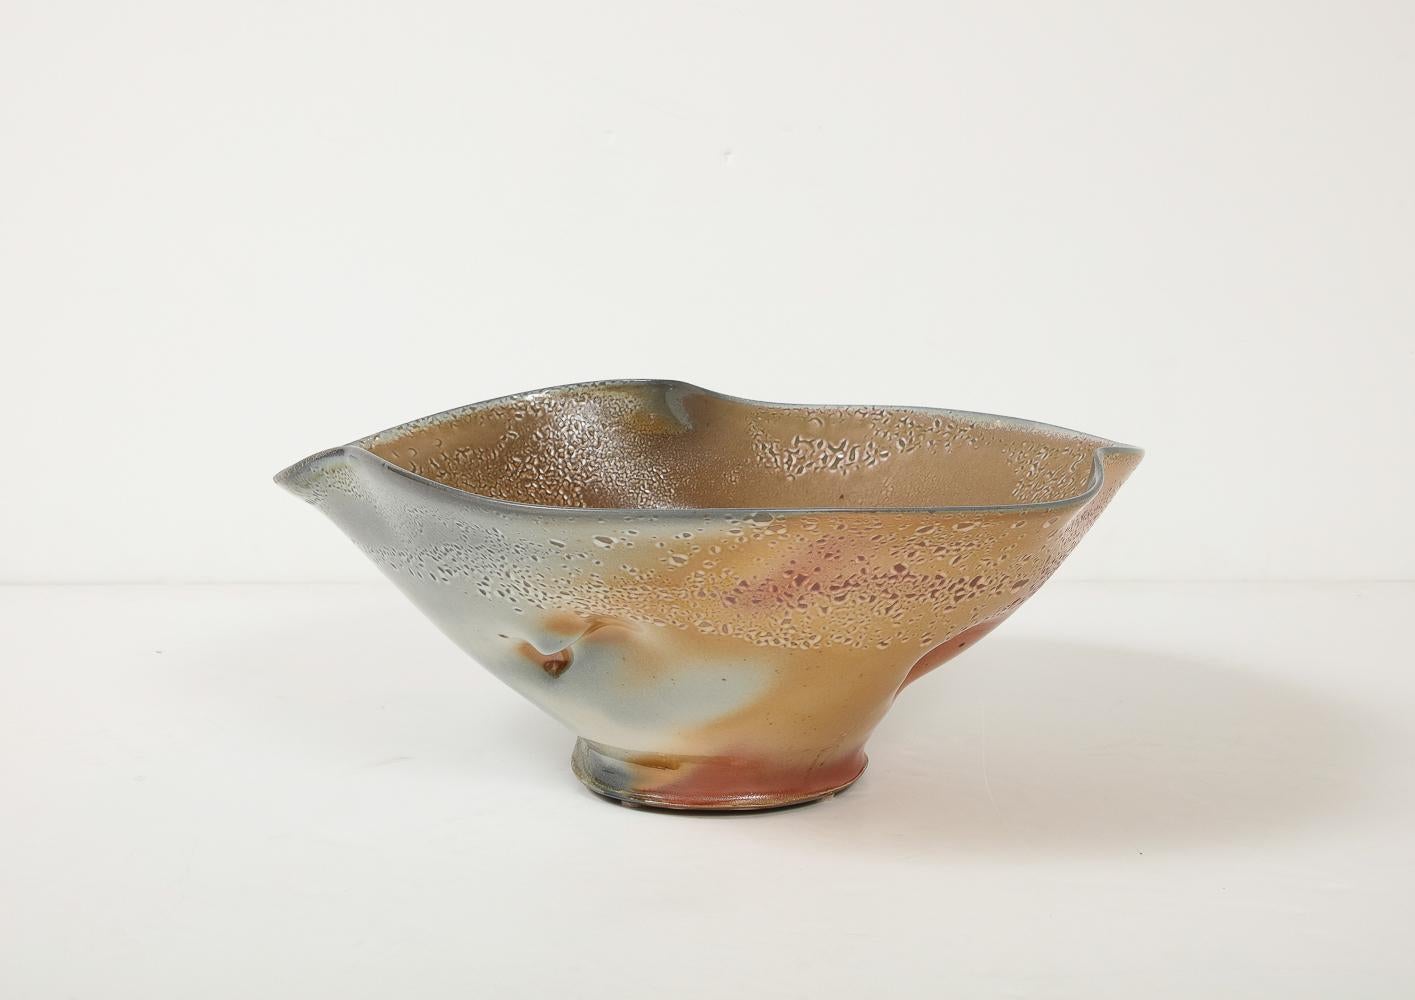 Glazed stoneware. Unique, wood-fired bowl with dimpled surfaces. Artist's cypher stamped on underside.